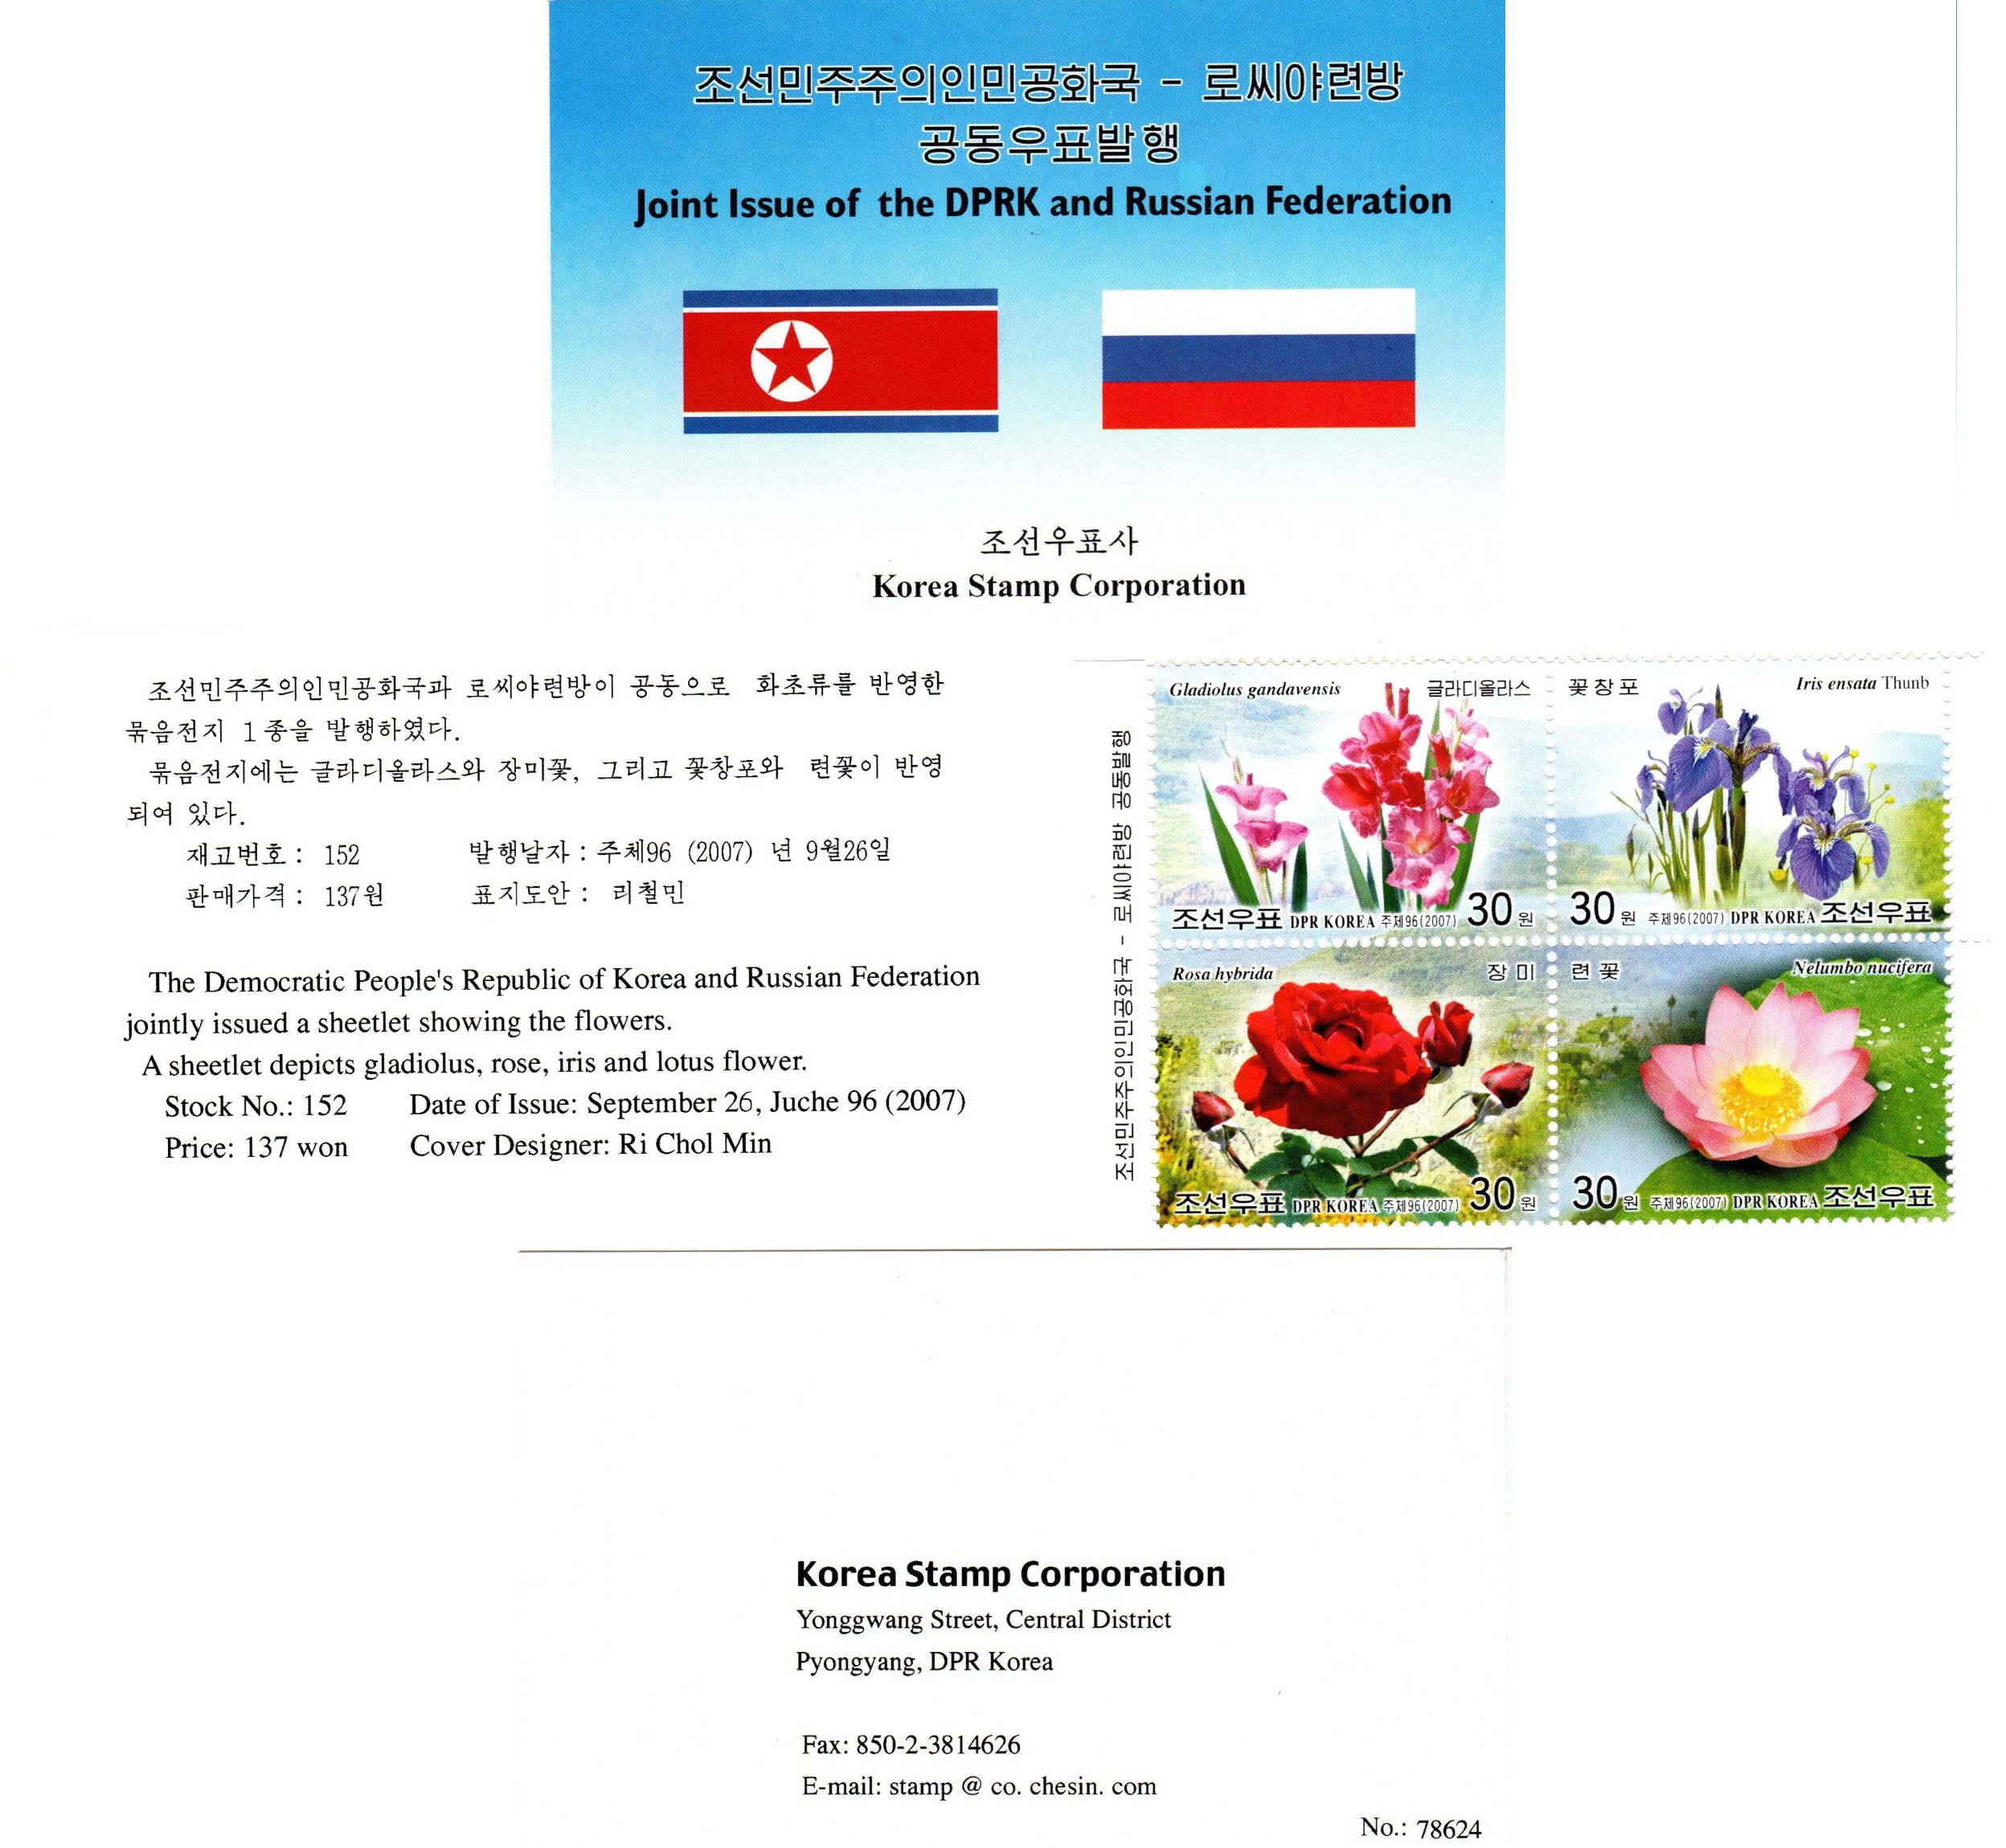 L9103, Korea "Flowers" Stamp Booklet, Joint issue with Russia, 2007